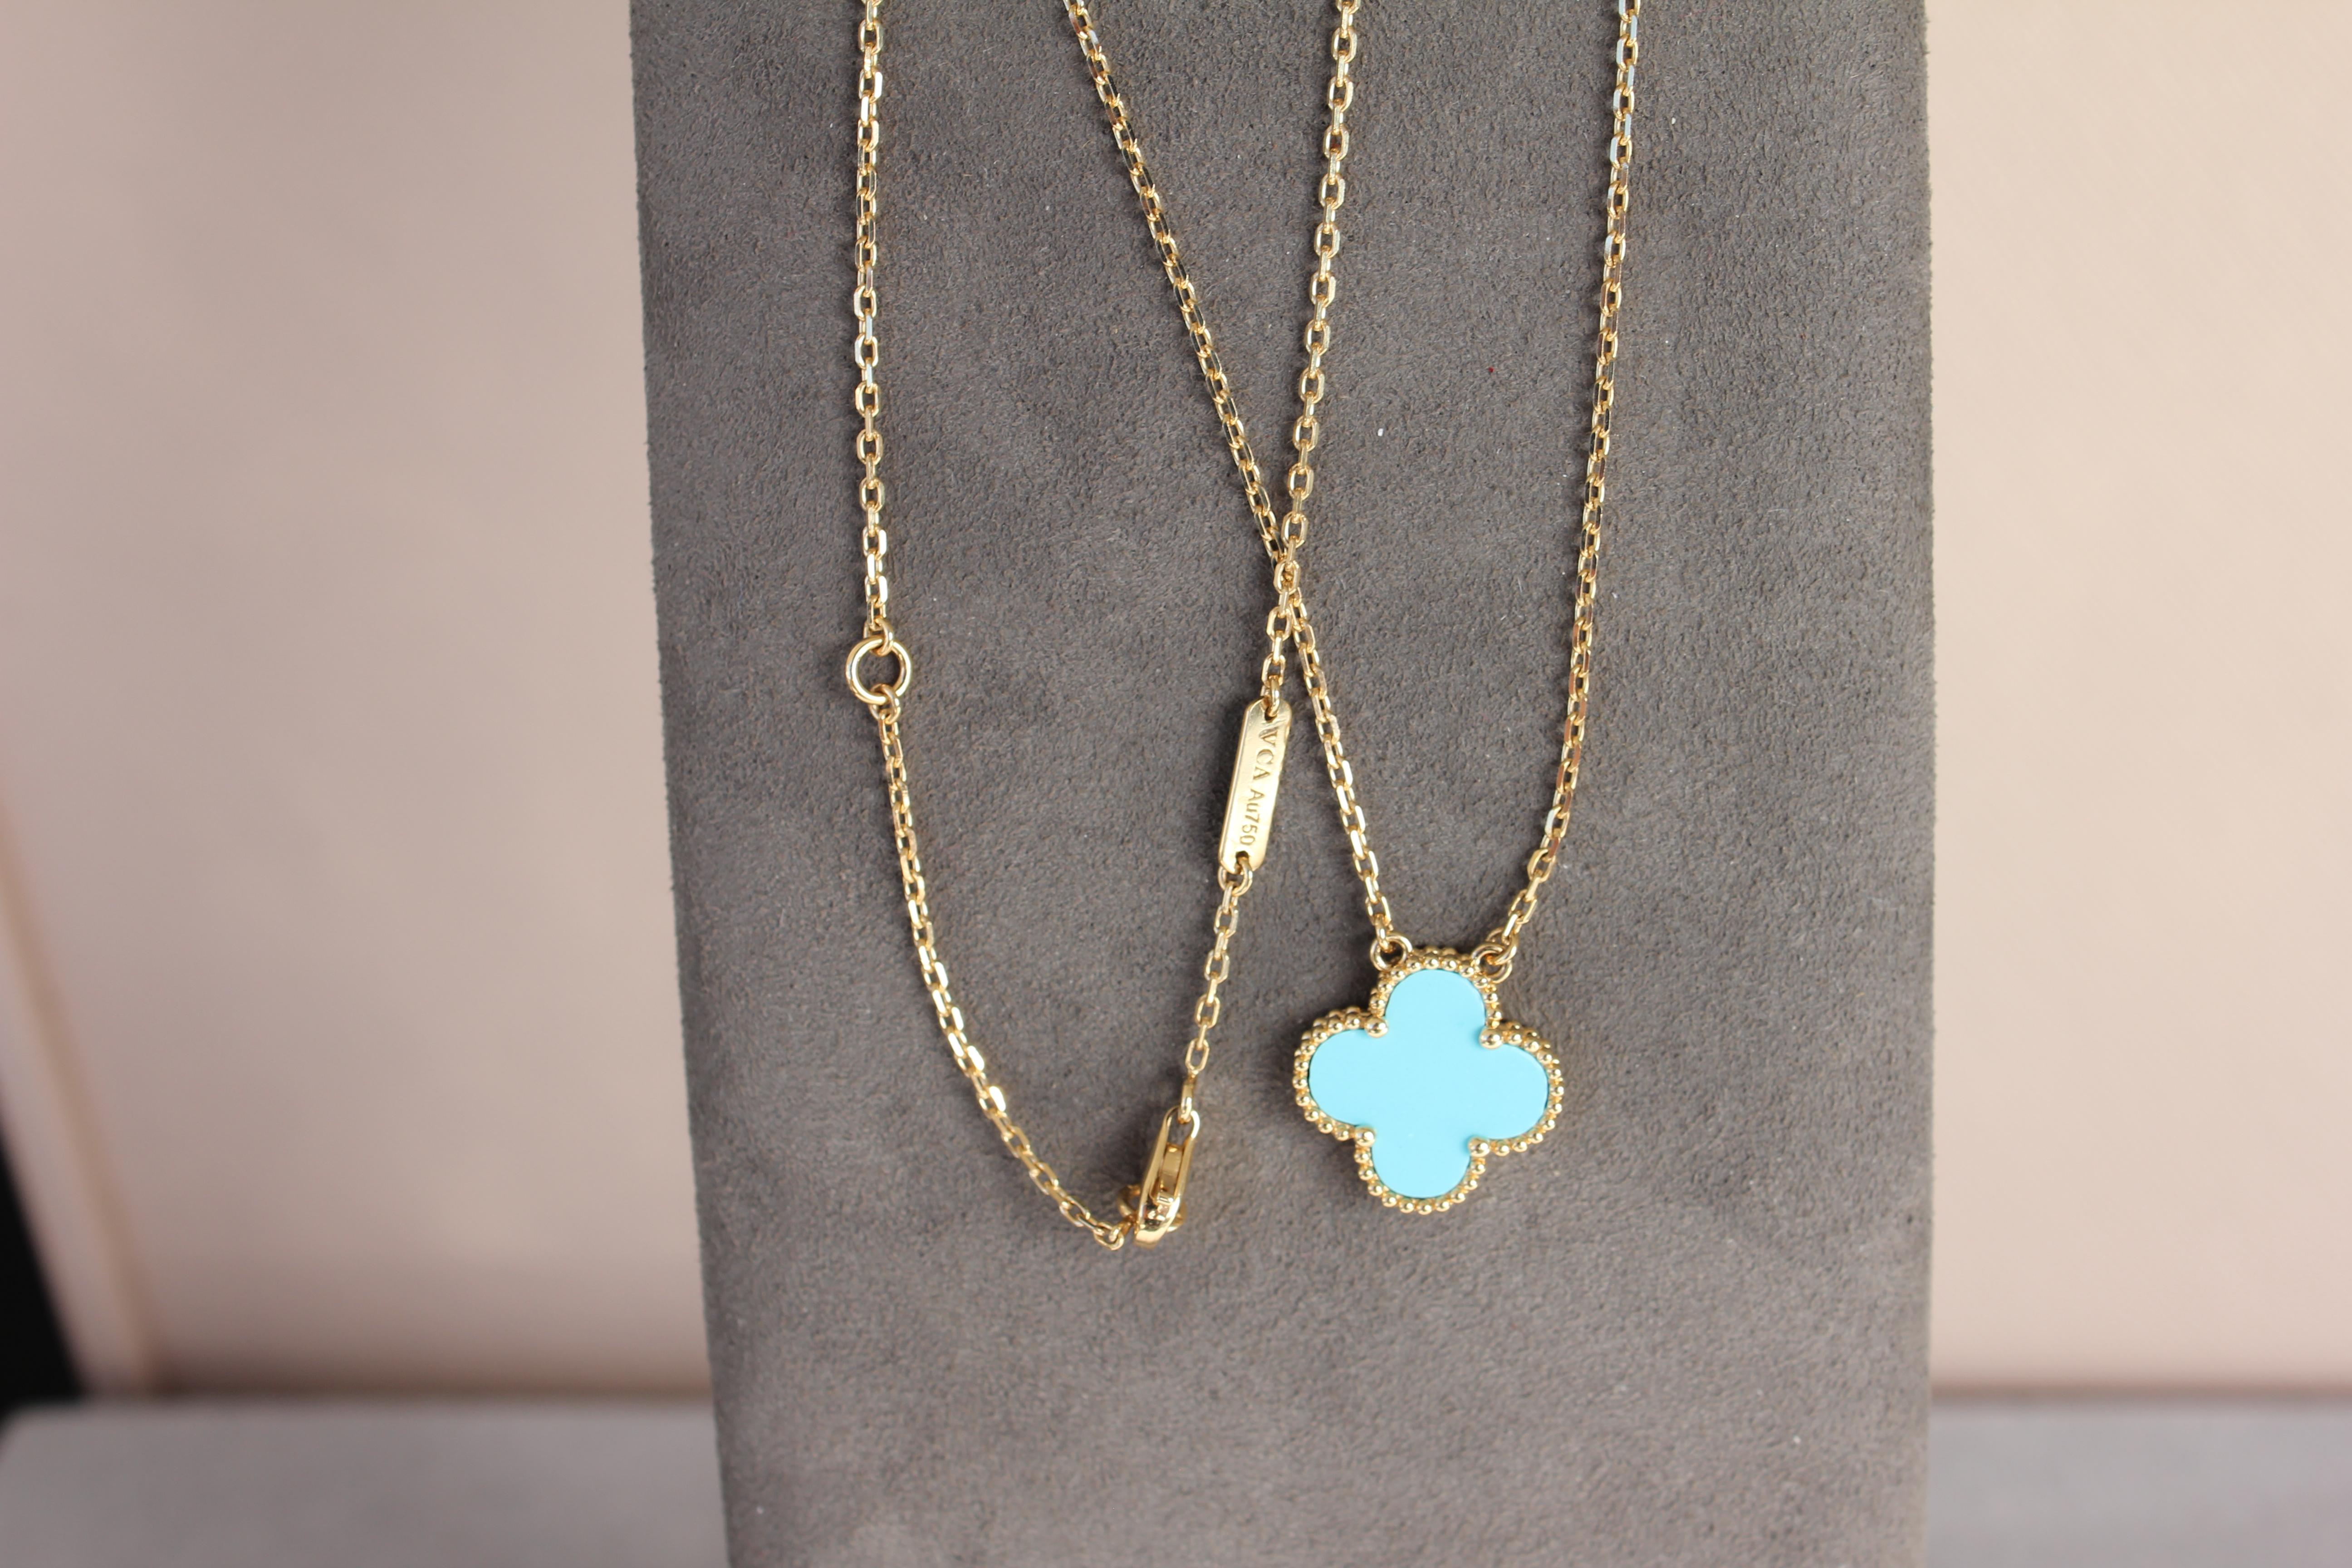 Van Cleef & Arpels Vintage Alhambra Turquoise 18K Yellow Gold Necklace Pendant For Sale 4